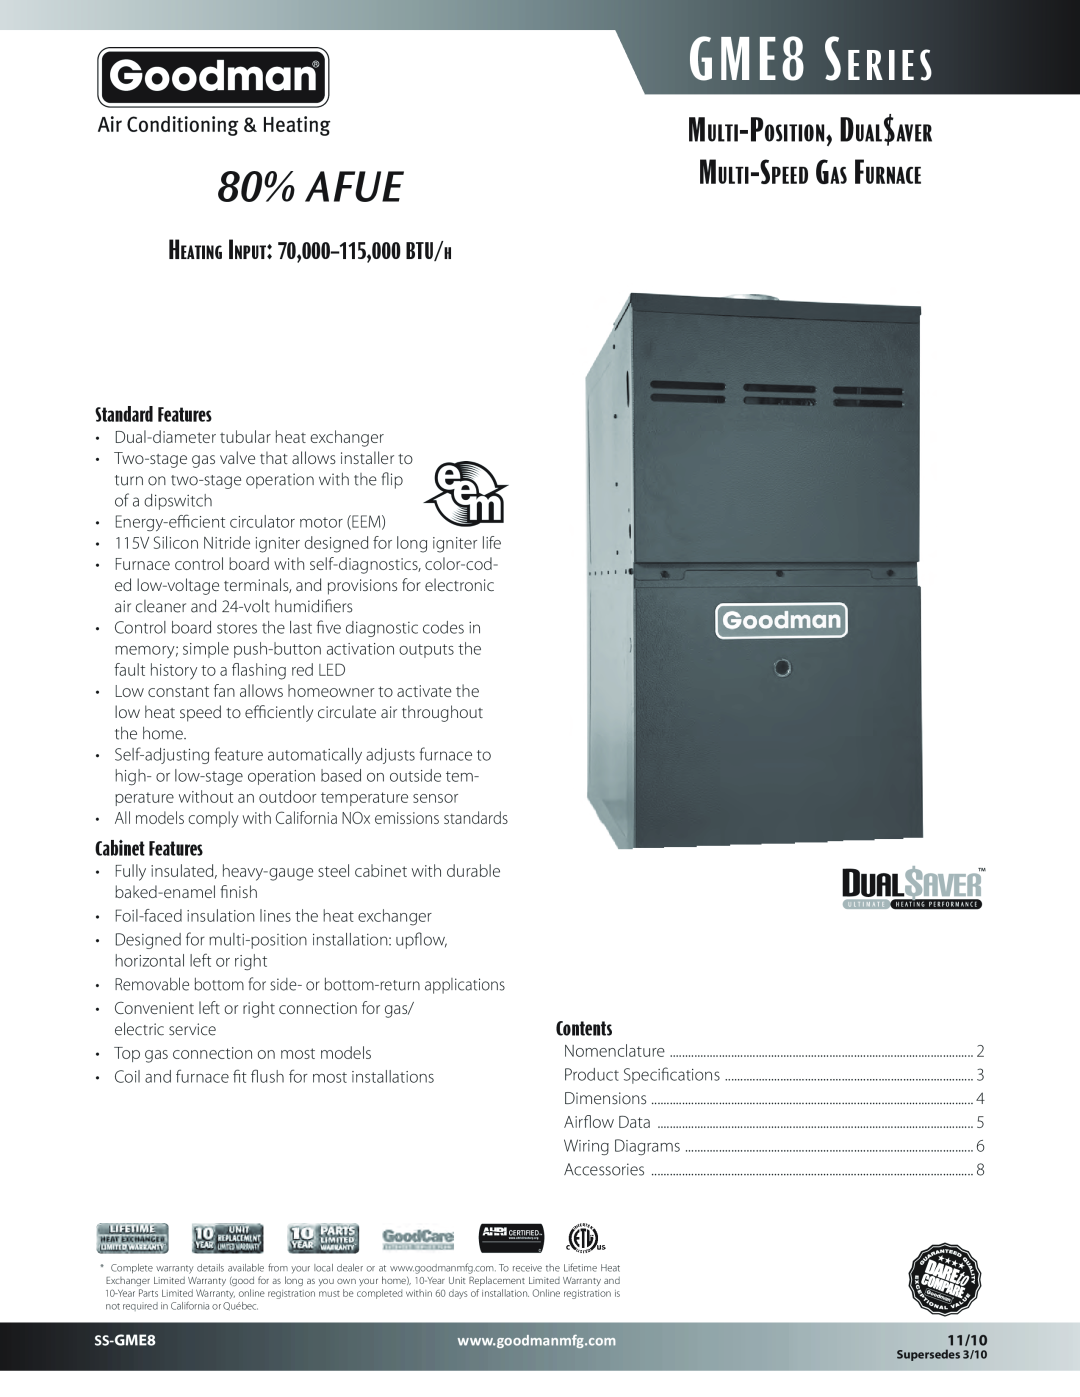 Goodman Mfg SS-GME8 dimensions Multi-Position,Dual$aver Multi-Speed Gas Furnace, GME8 Series, 80% AFUE, Standard Features 